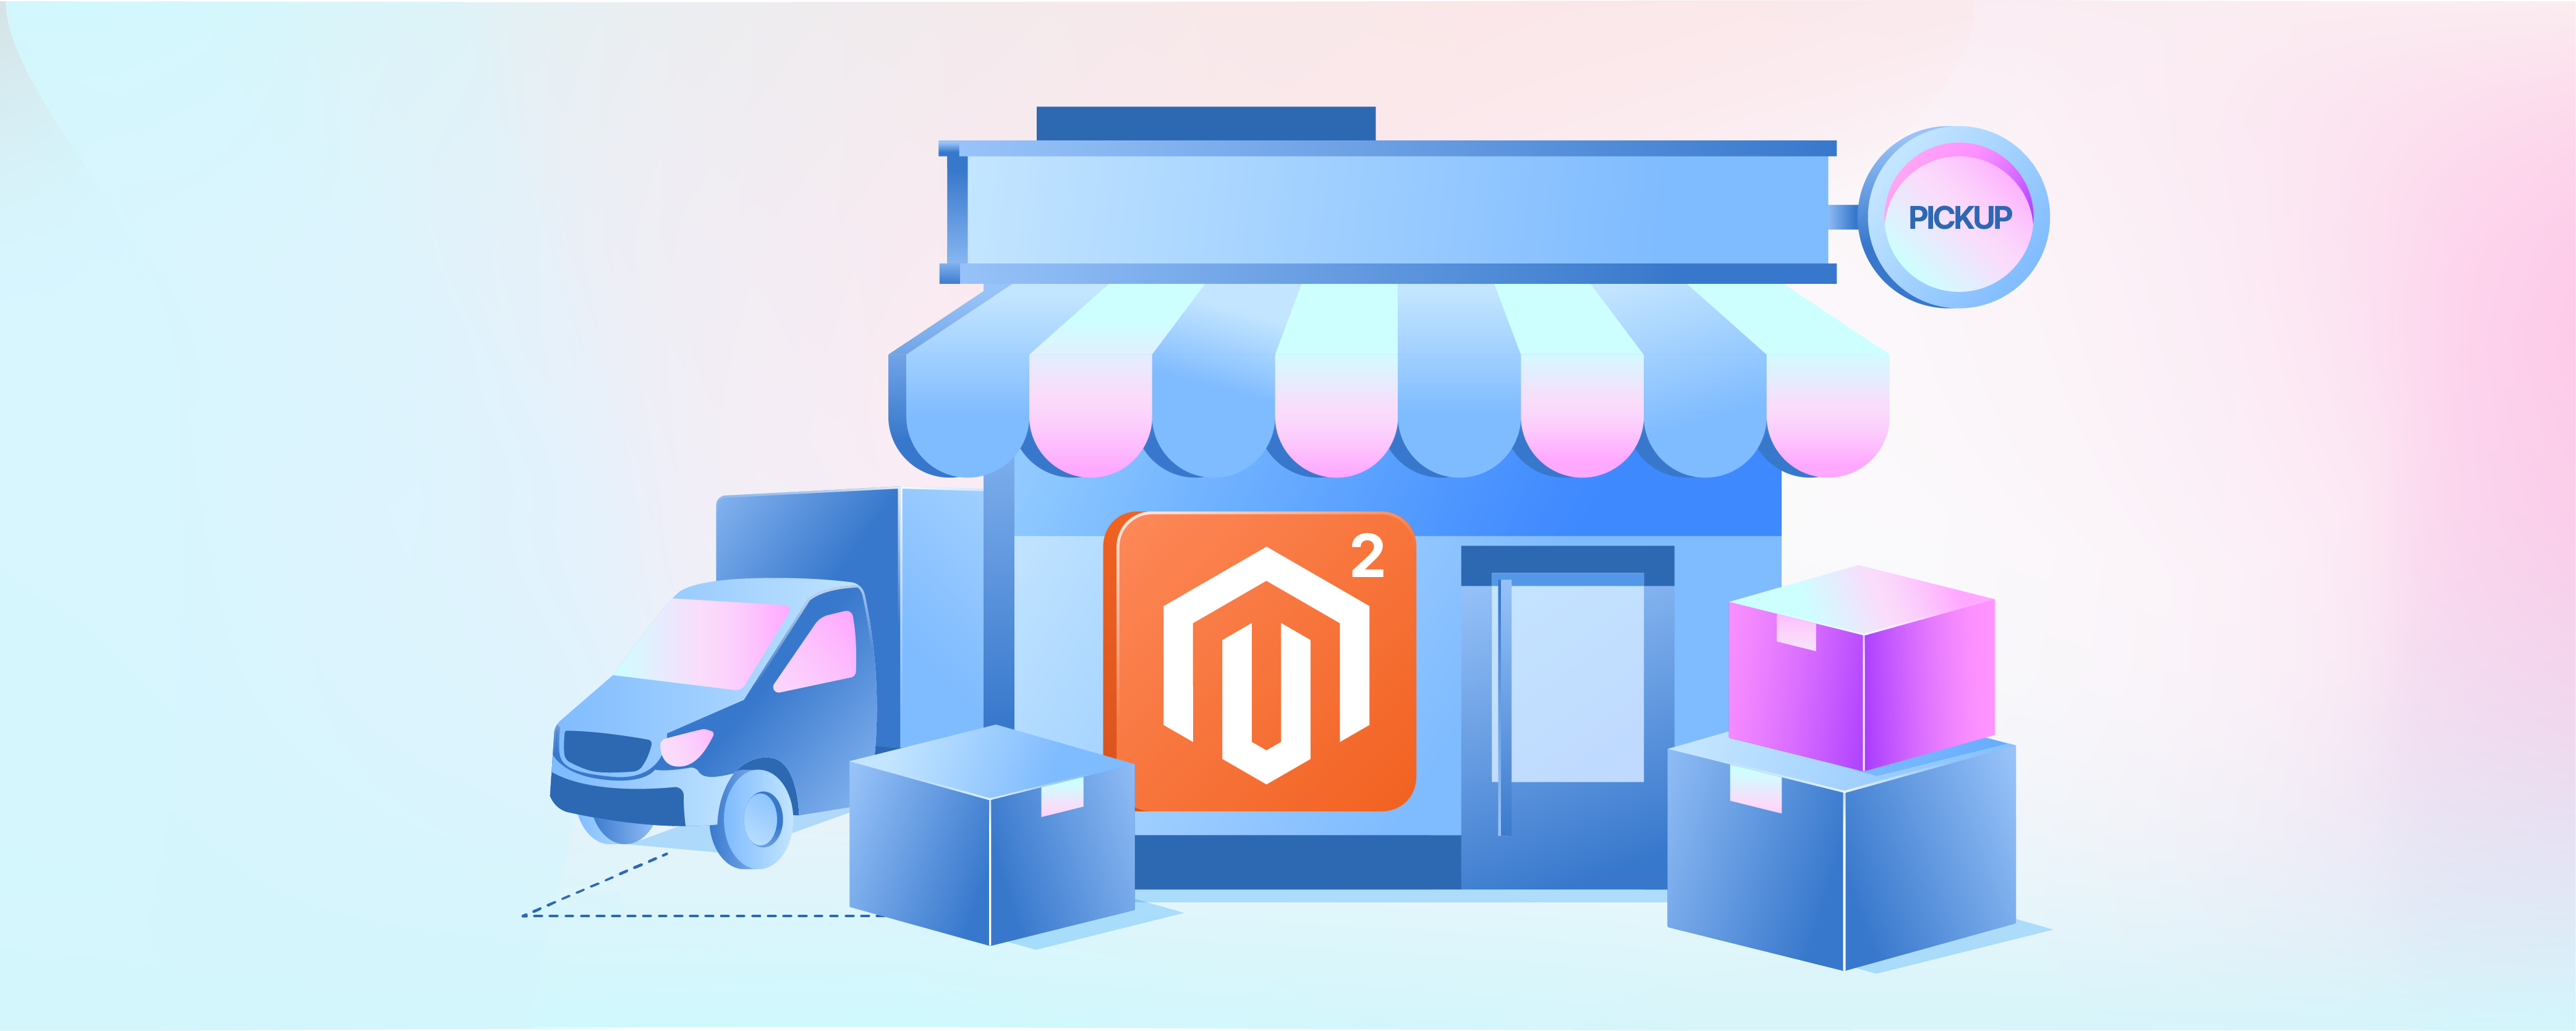 Magento 2 In-Store Pickup: Benefits and Configuration